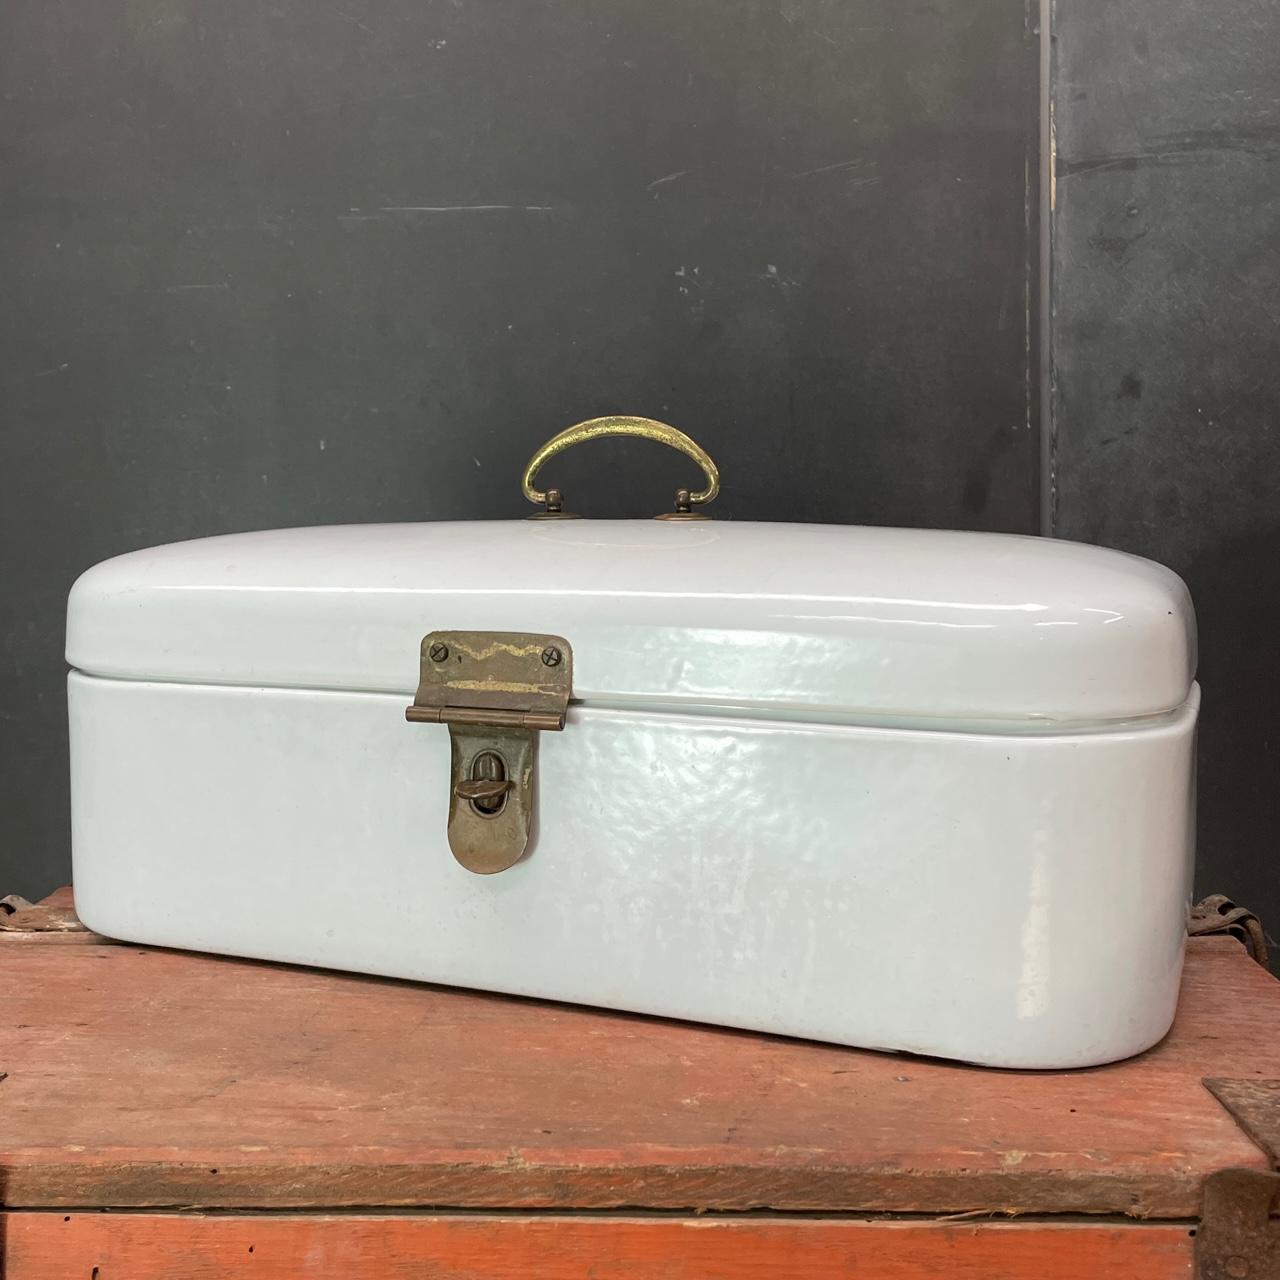 A very nice clean enamel lidded storage box with tarnished brass hardware. A wonderful design element for a Coastal or Colonial Revival interior. Good size for storage, small books, or remotes. Latch is not foolproof, so be careful carrying it about